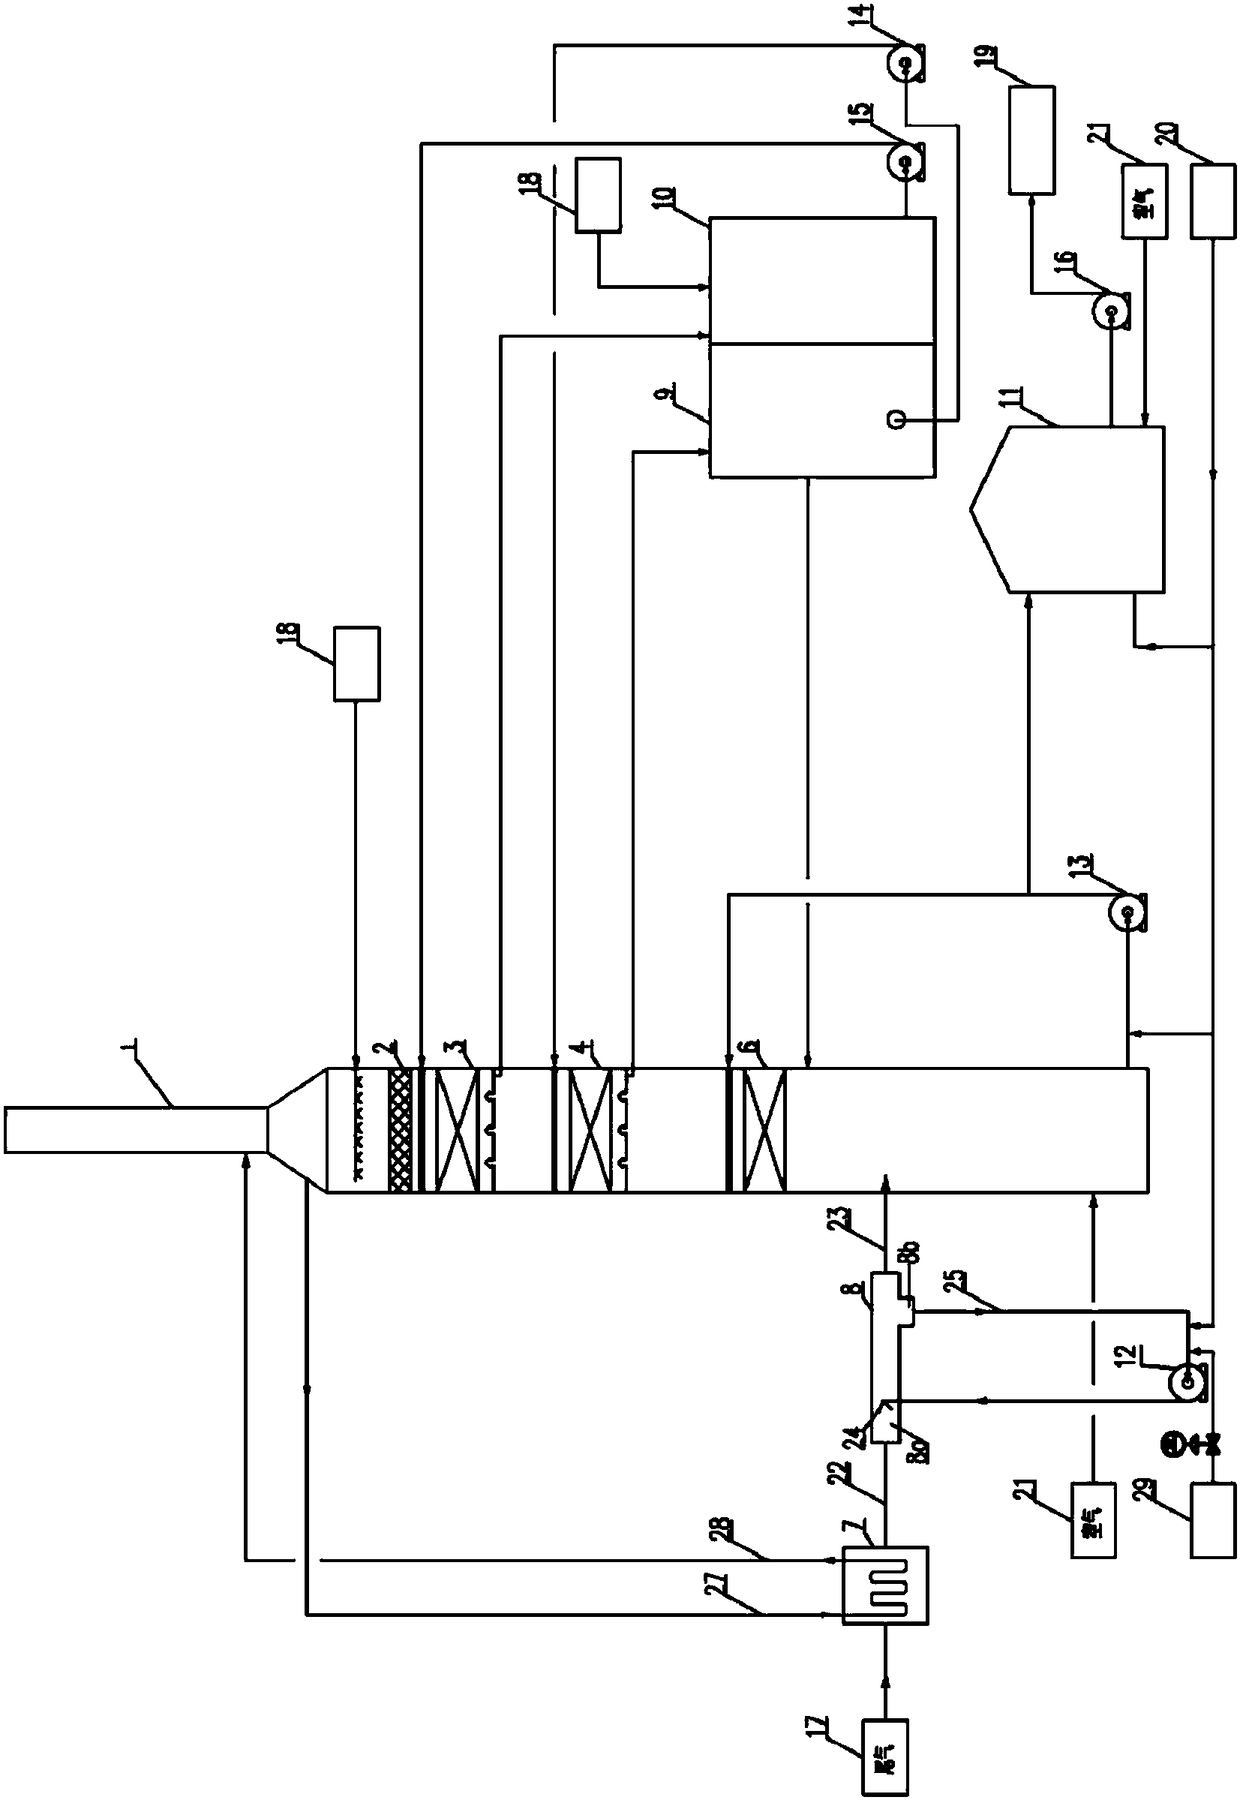 Flue gas desulfurizing system and method using flue gas desulfurizing system to desulfurize flue gas